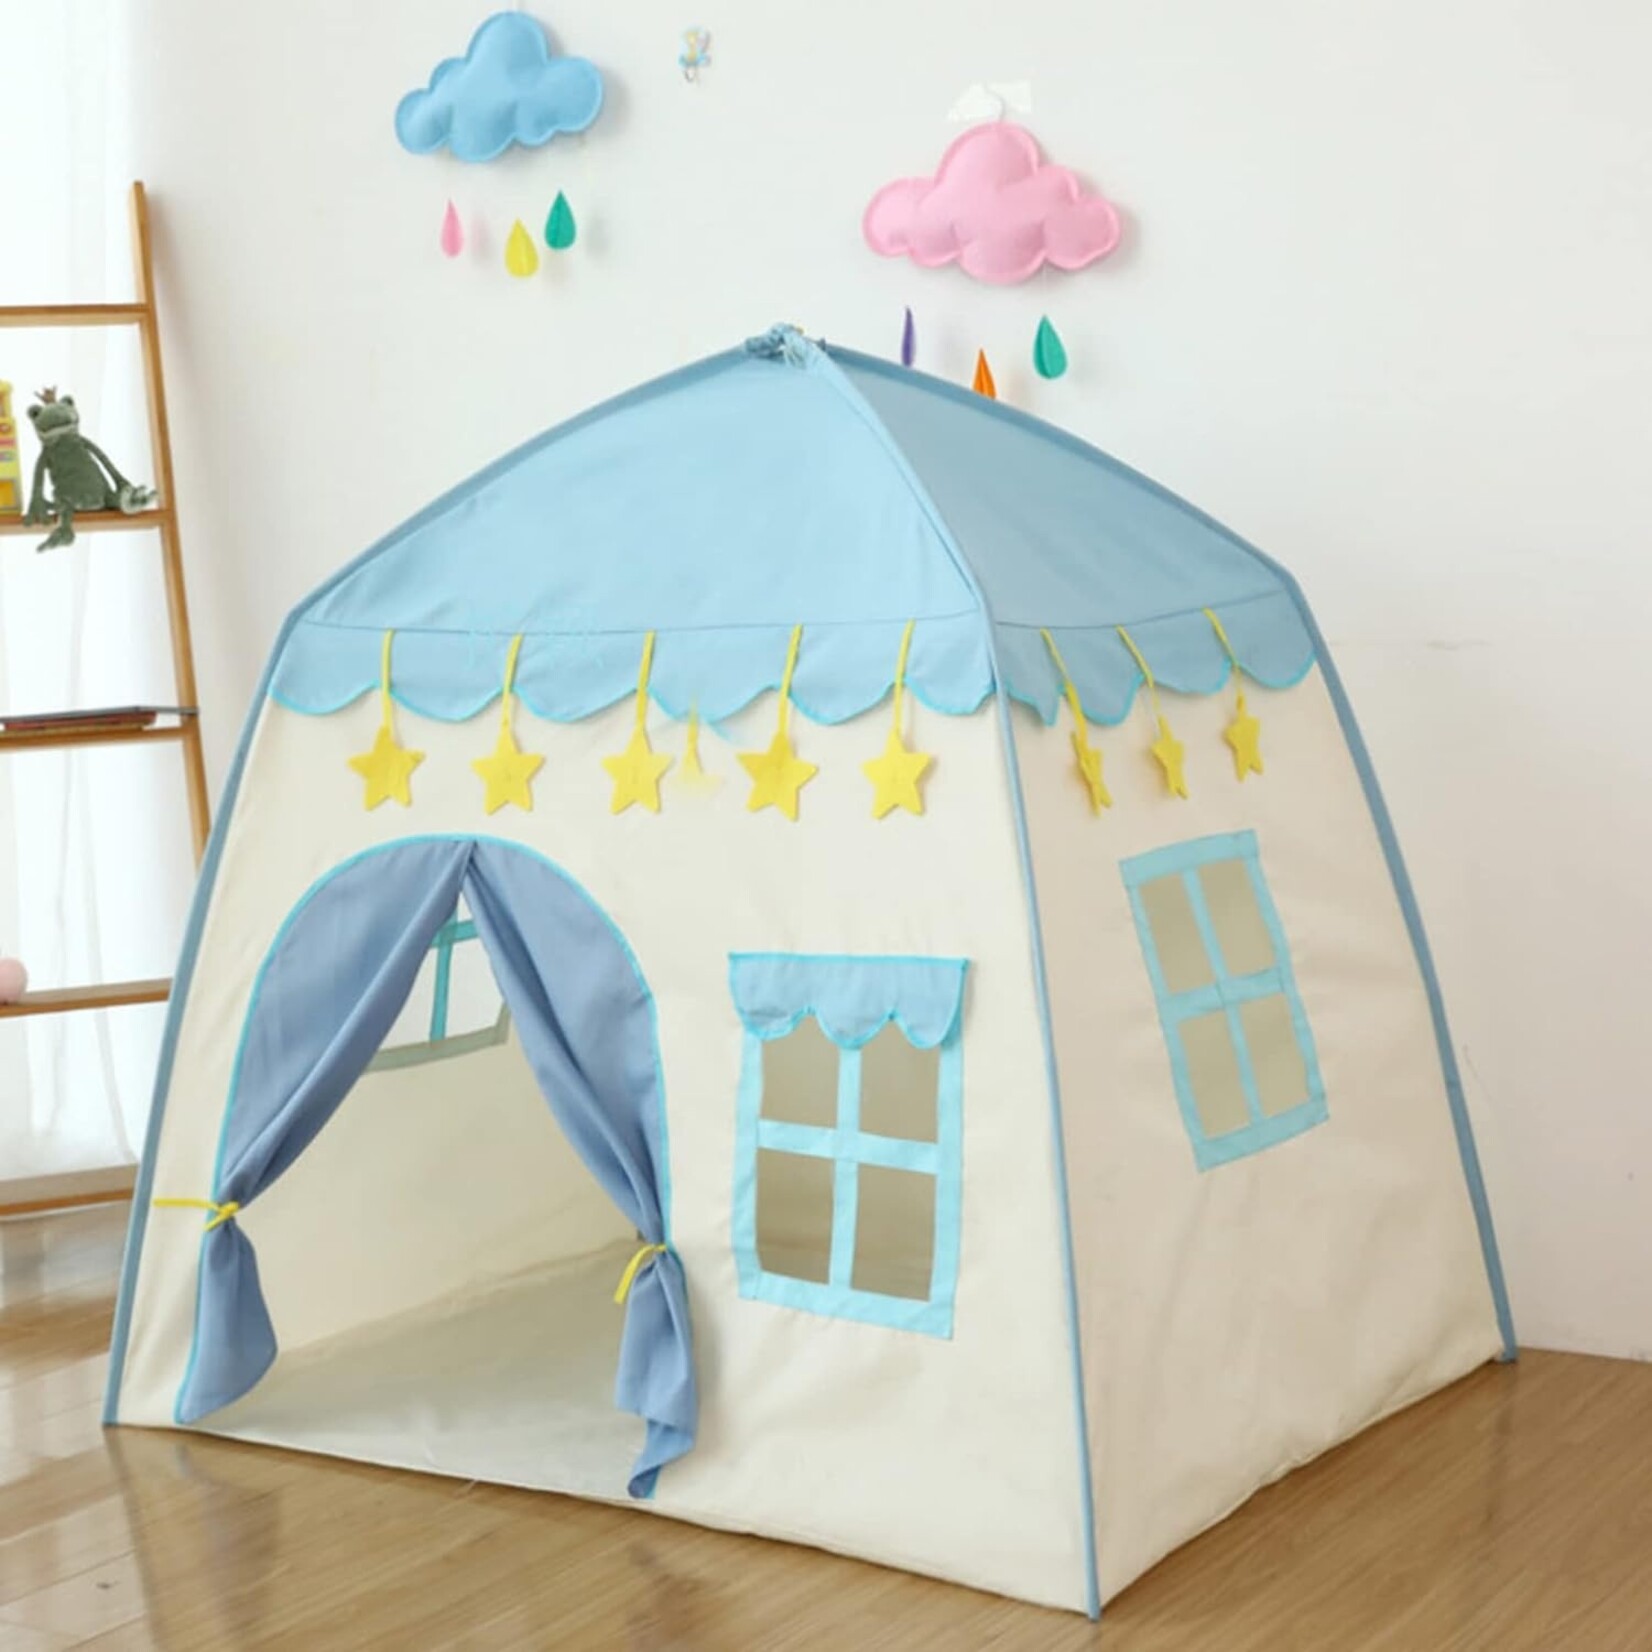 Bobbel Home Bobbel Home - Spacious Play Tent - For indoor and outdoor use - Blue & White